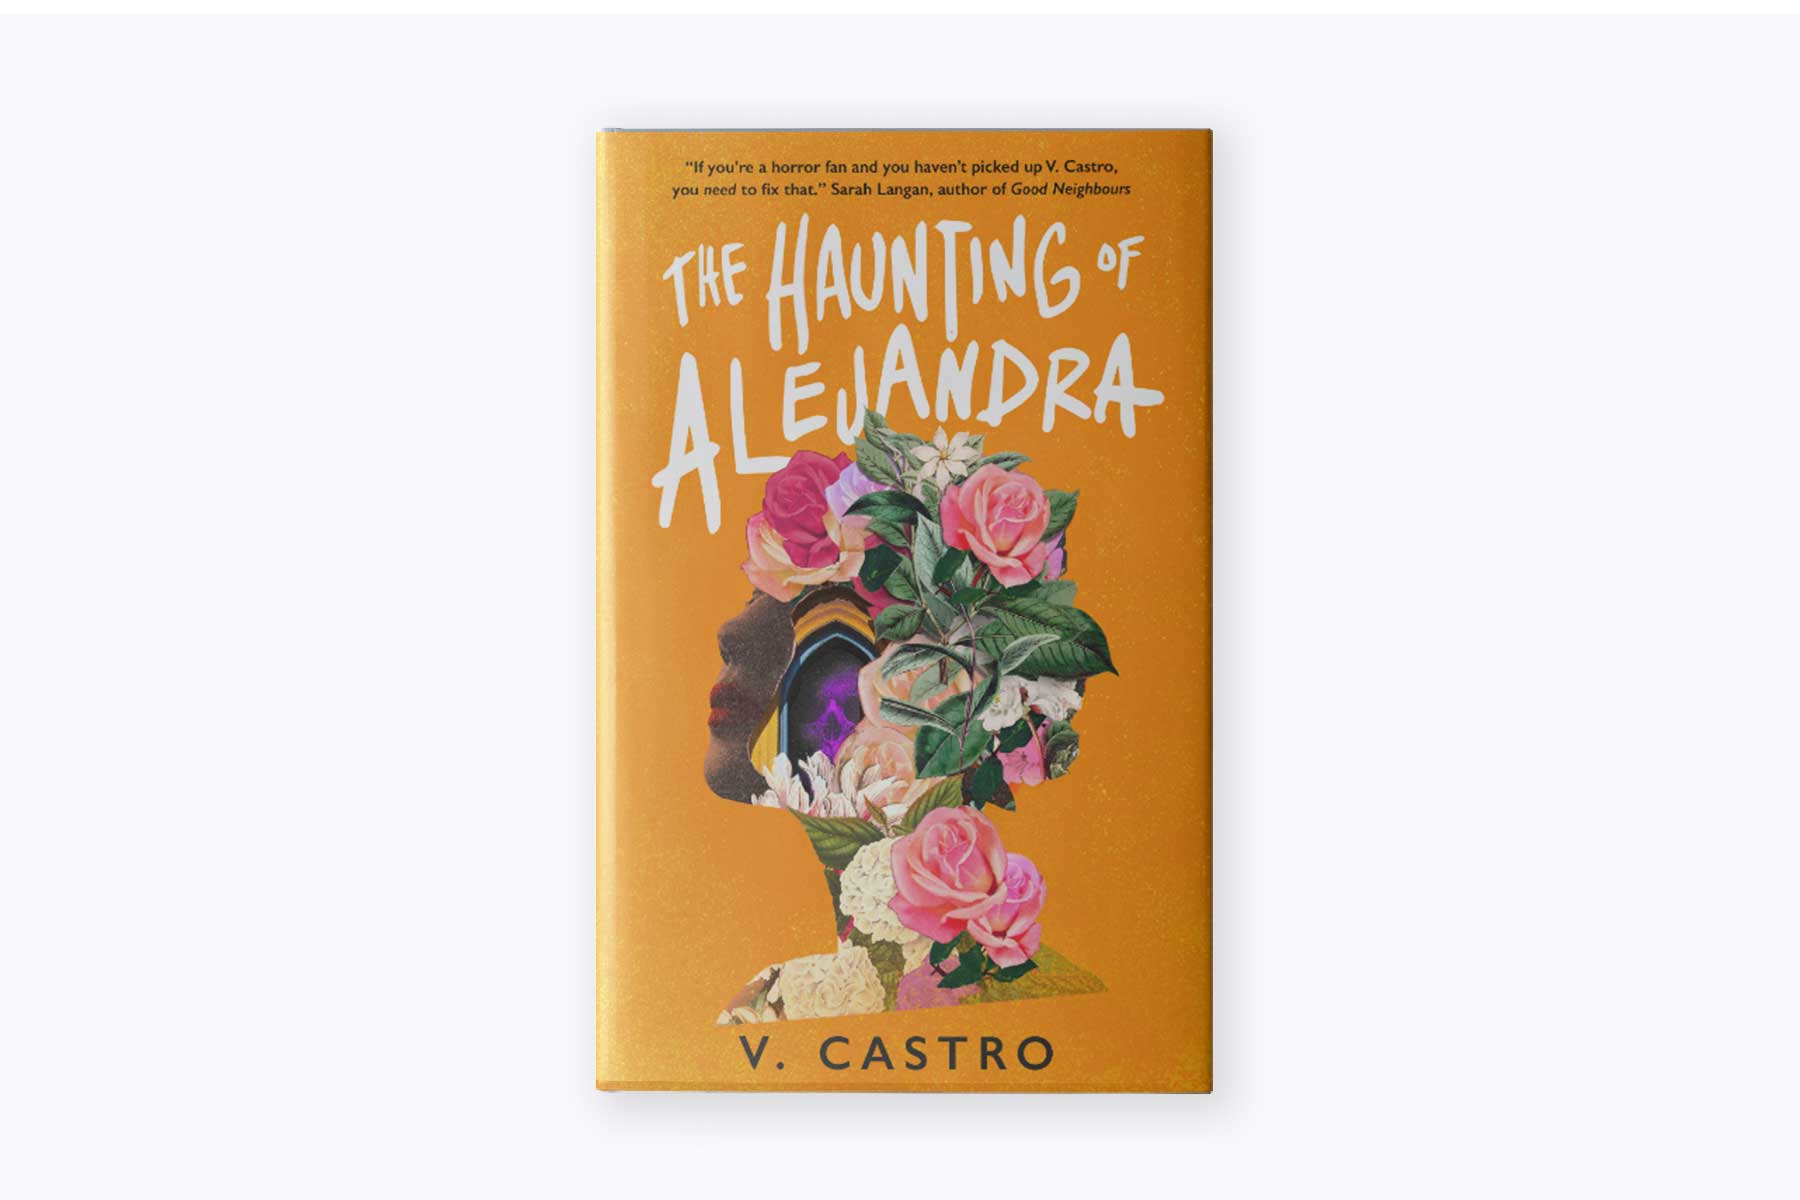 The cover of V. Castro's book, The Haunting of Alejandra.